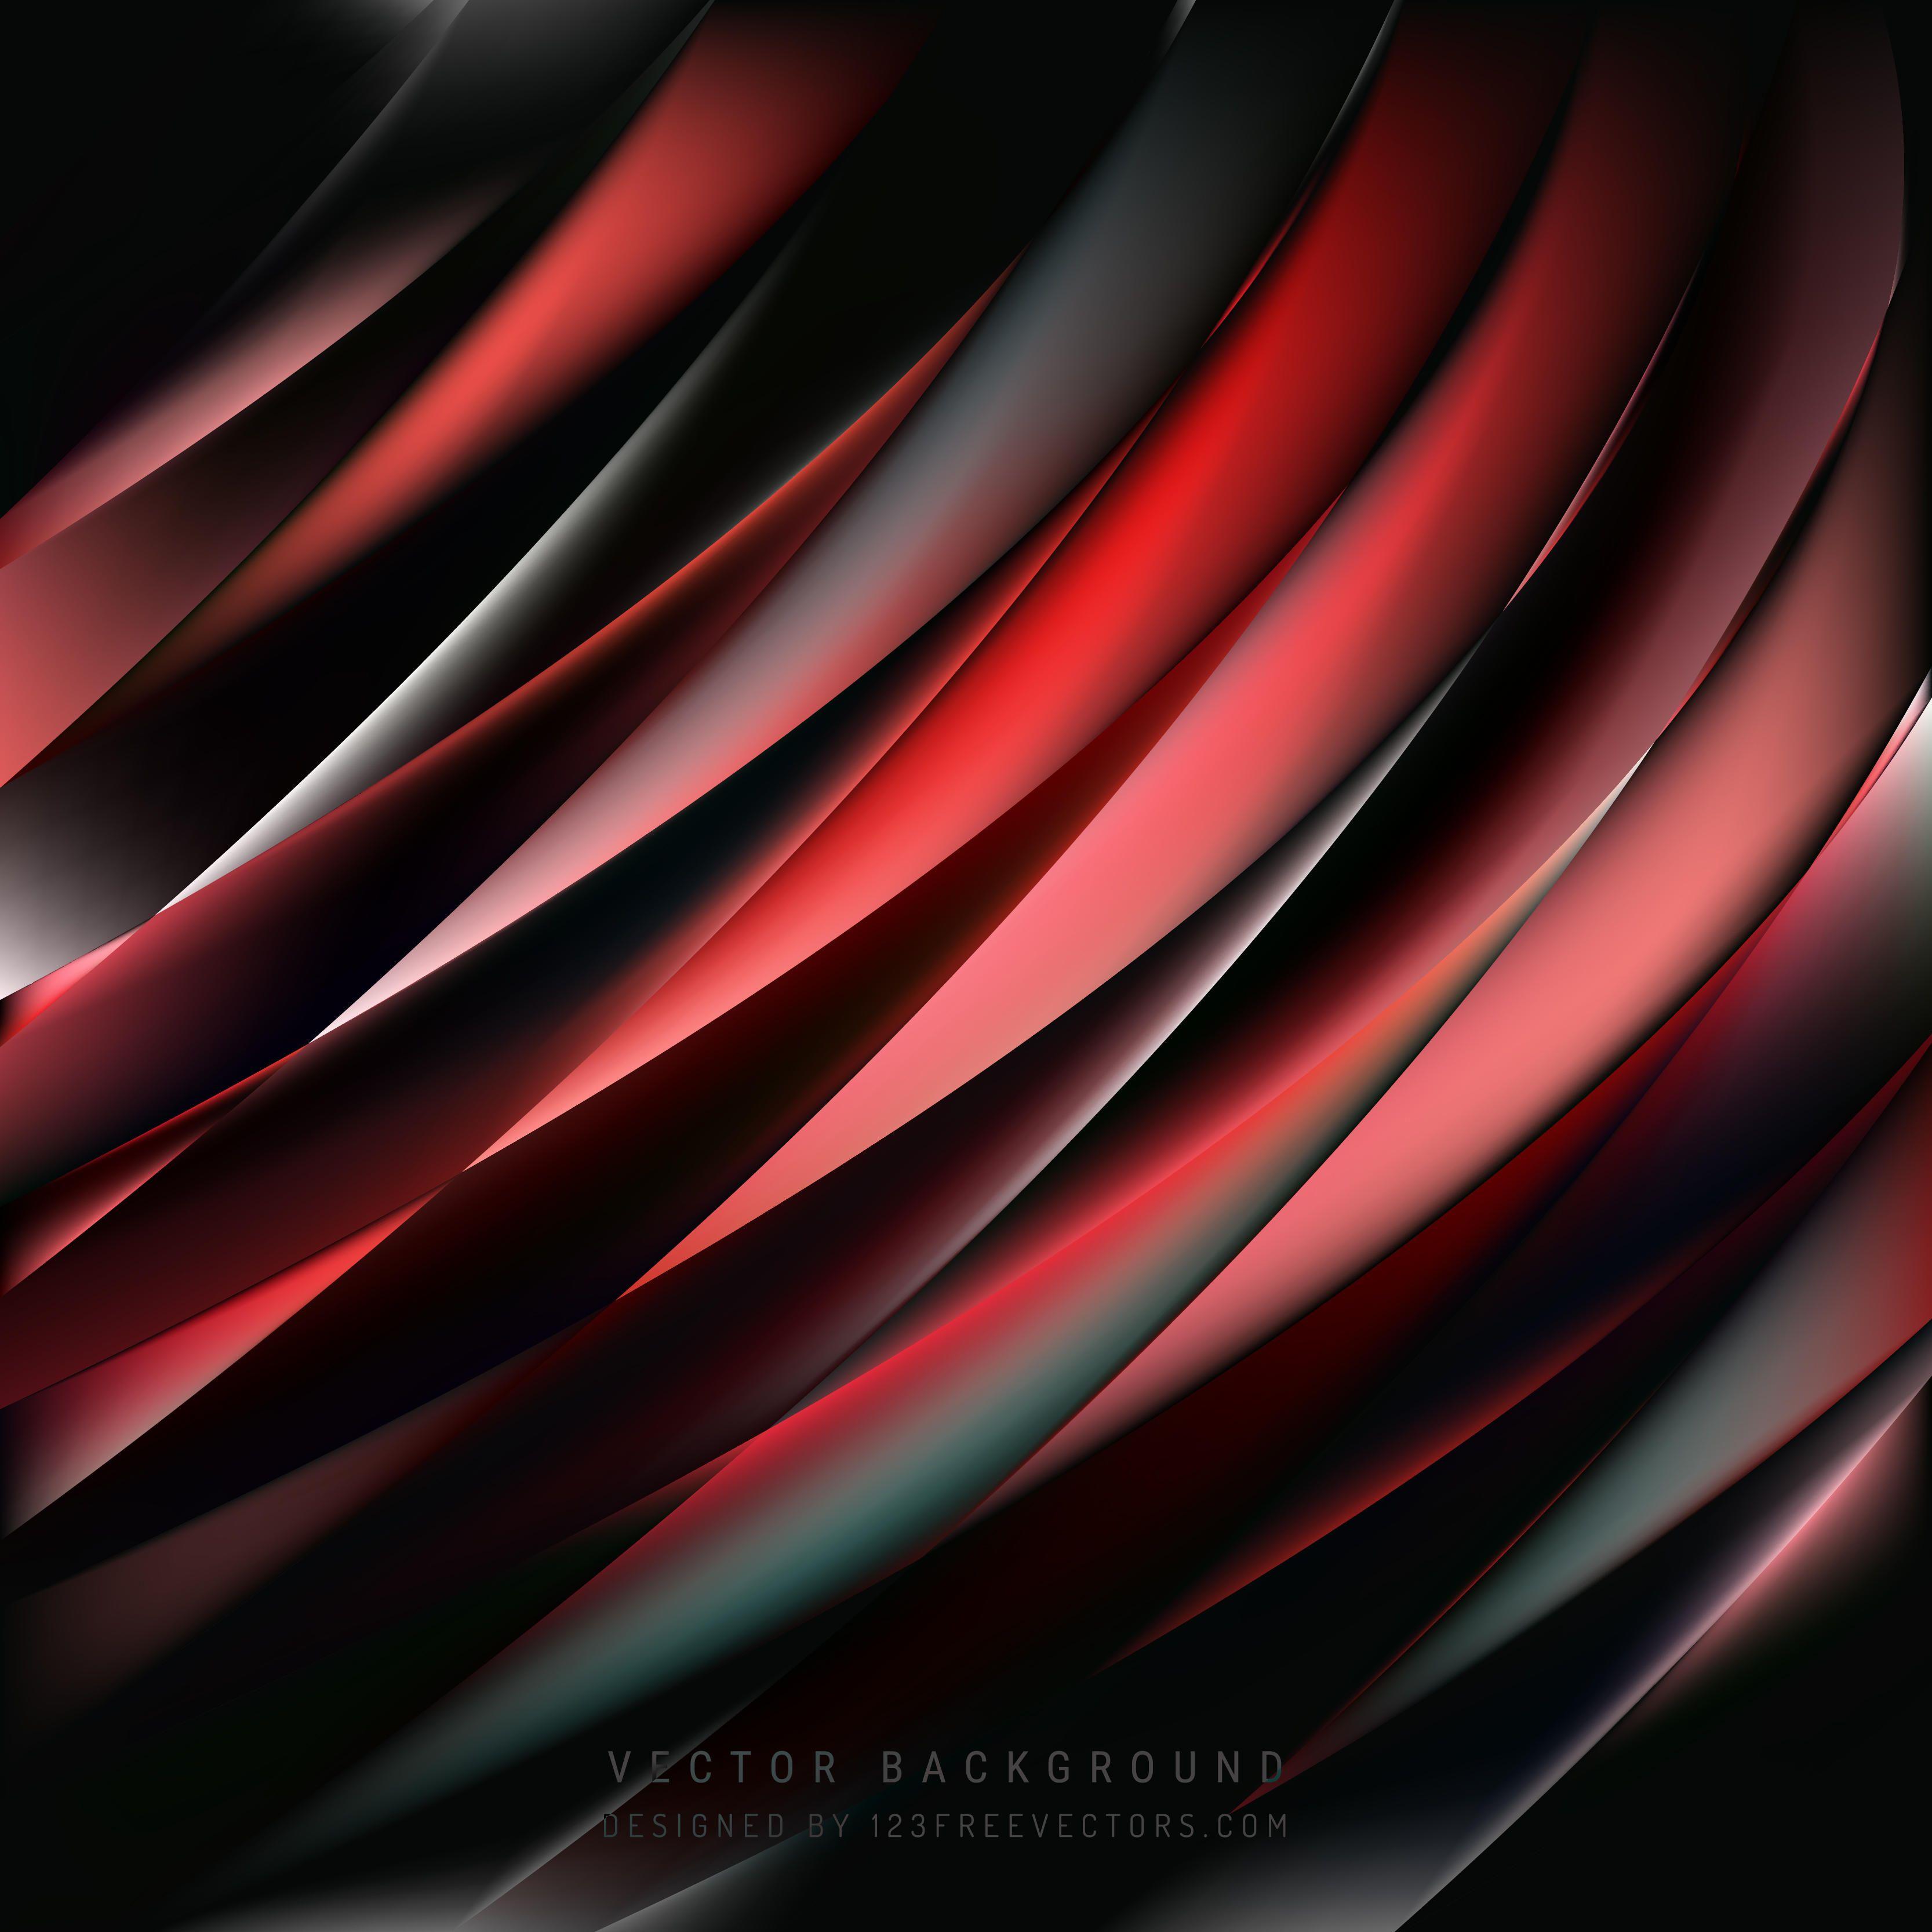 Abstract Red Black Background VectorFreevectors